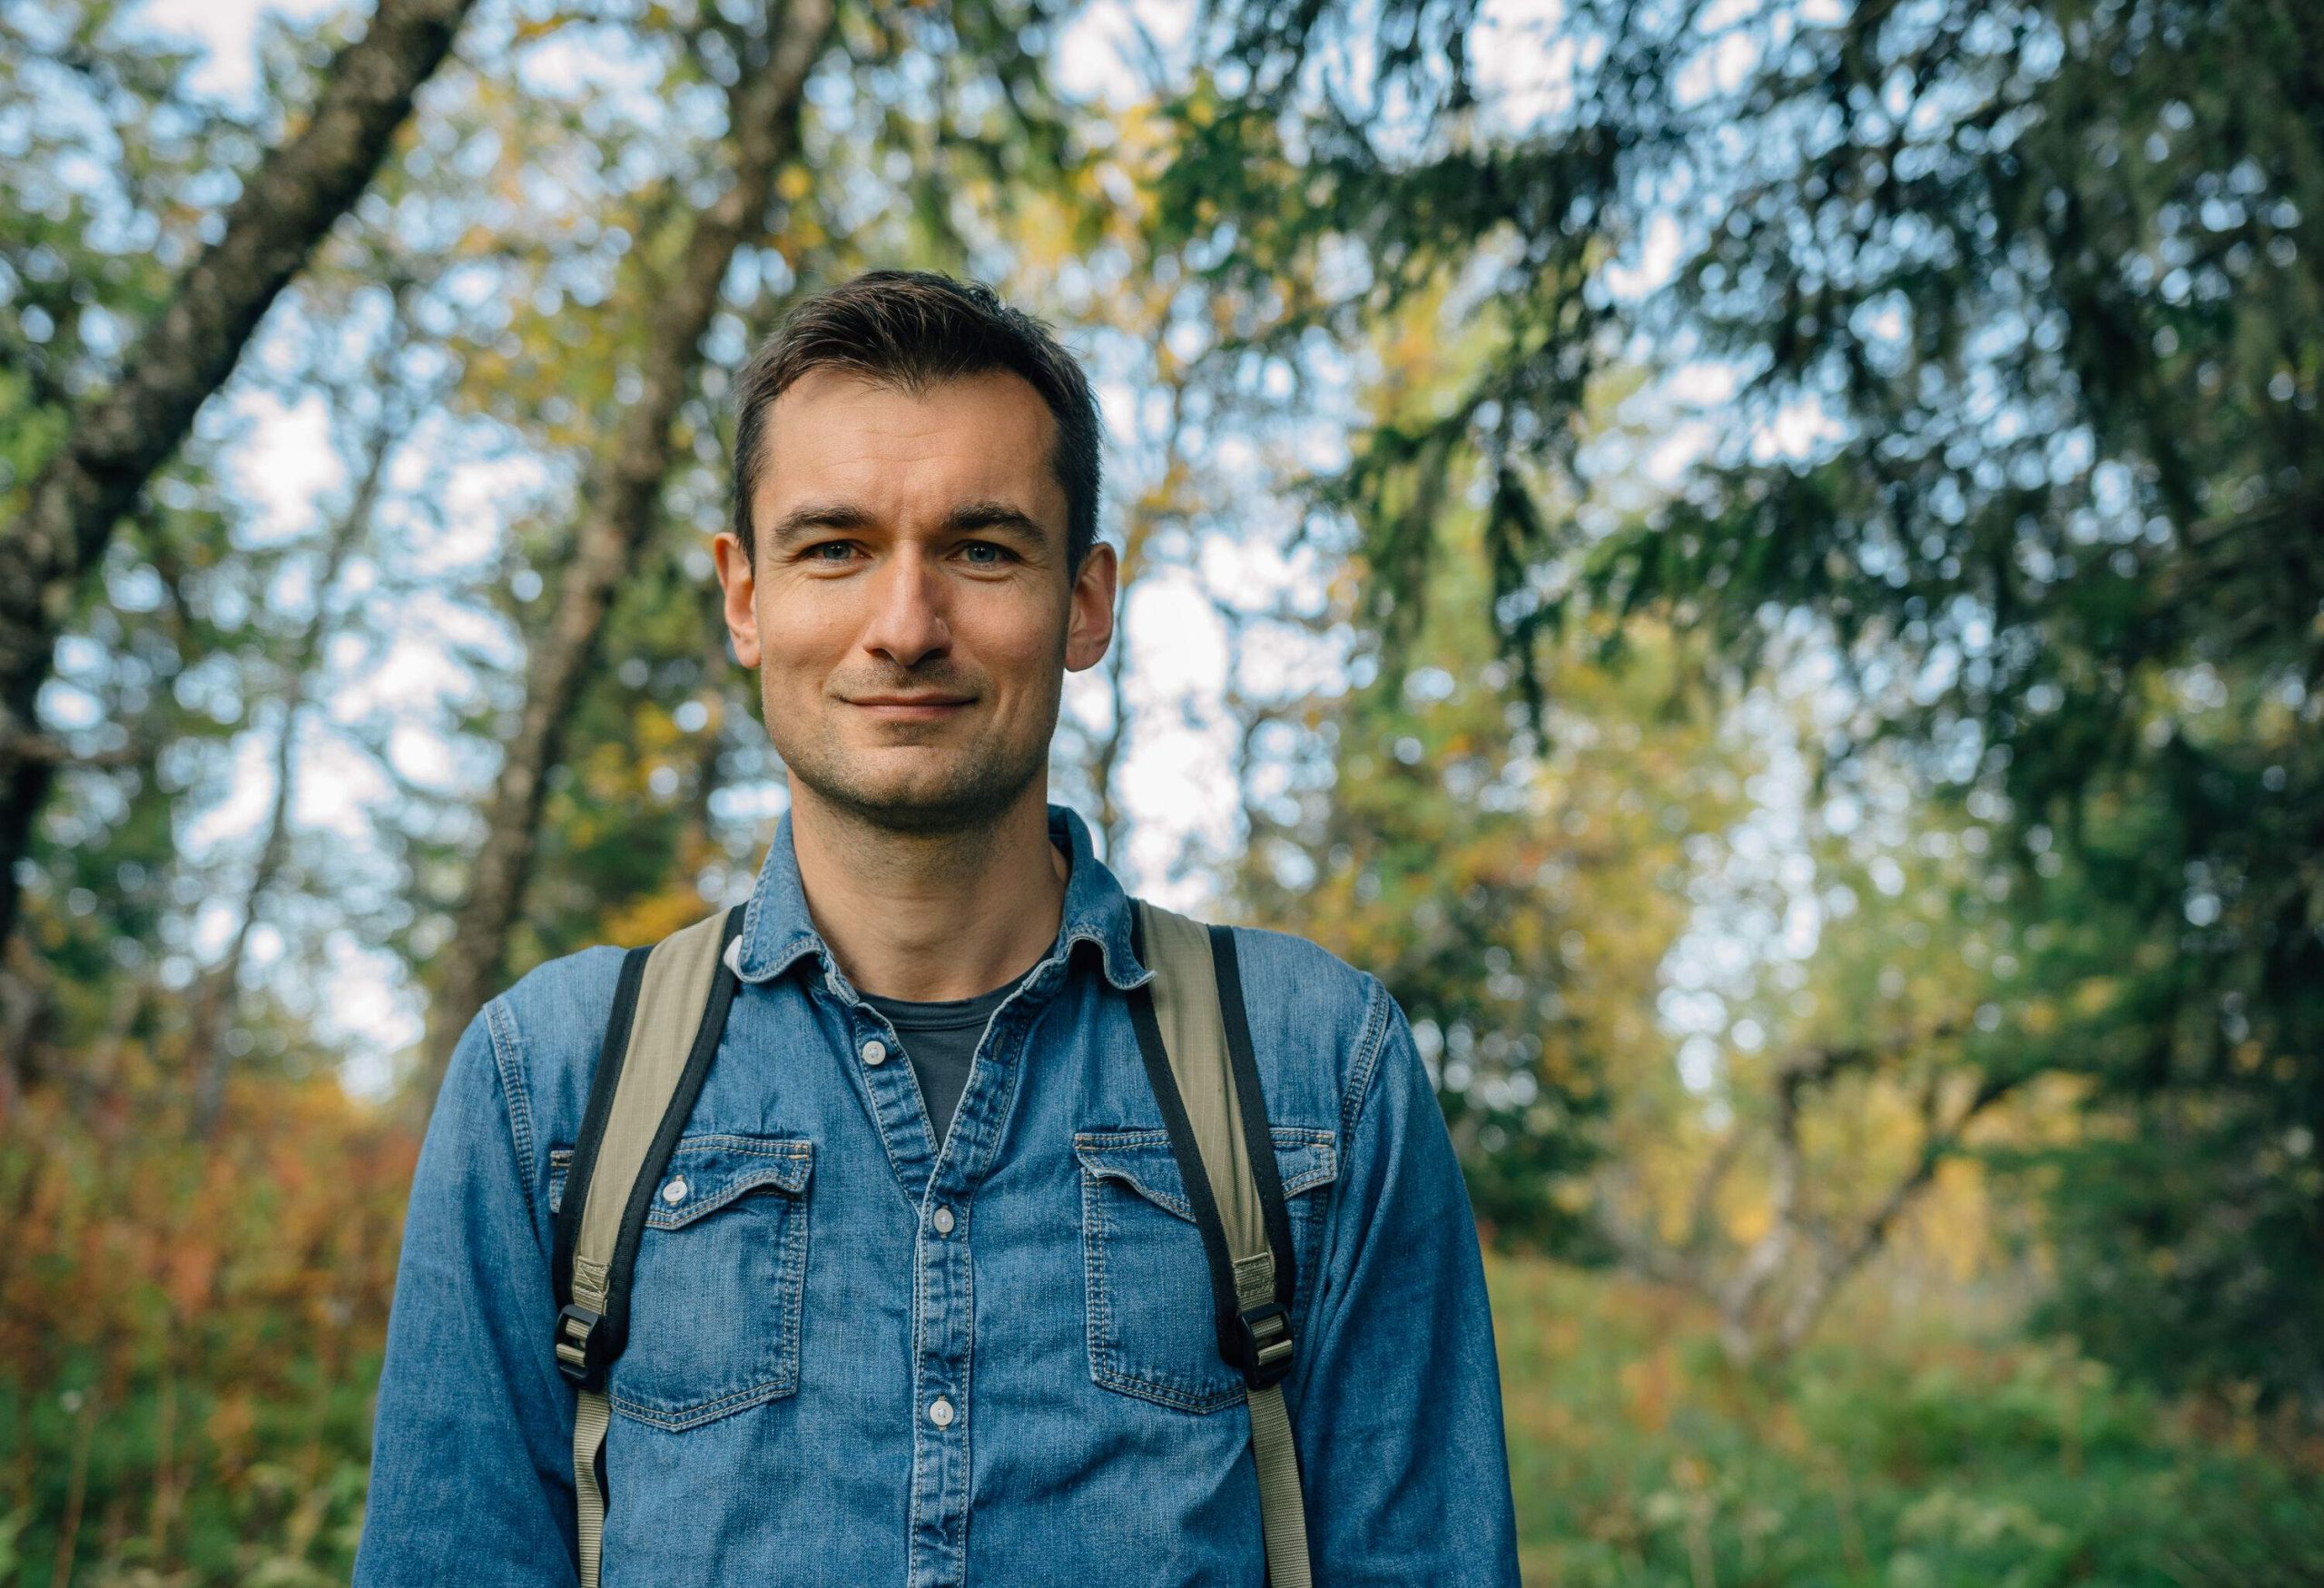 A portrait of a smiling man wearing a denim polo and a backpack against a nature background.